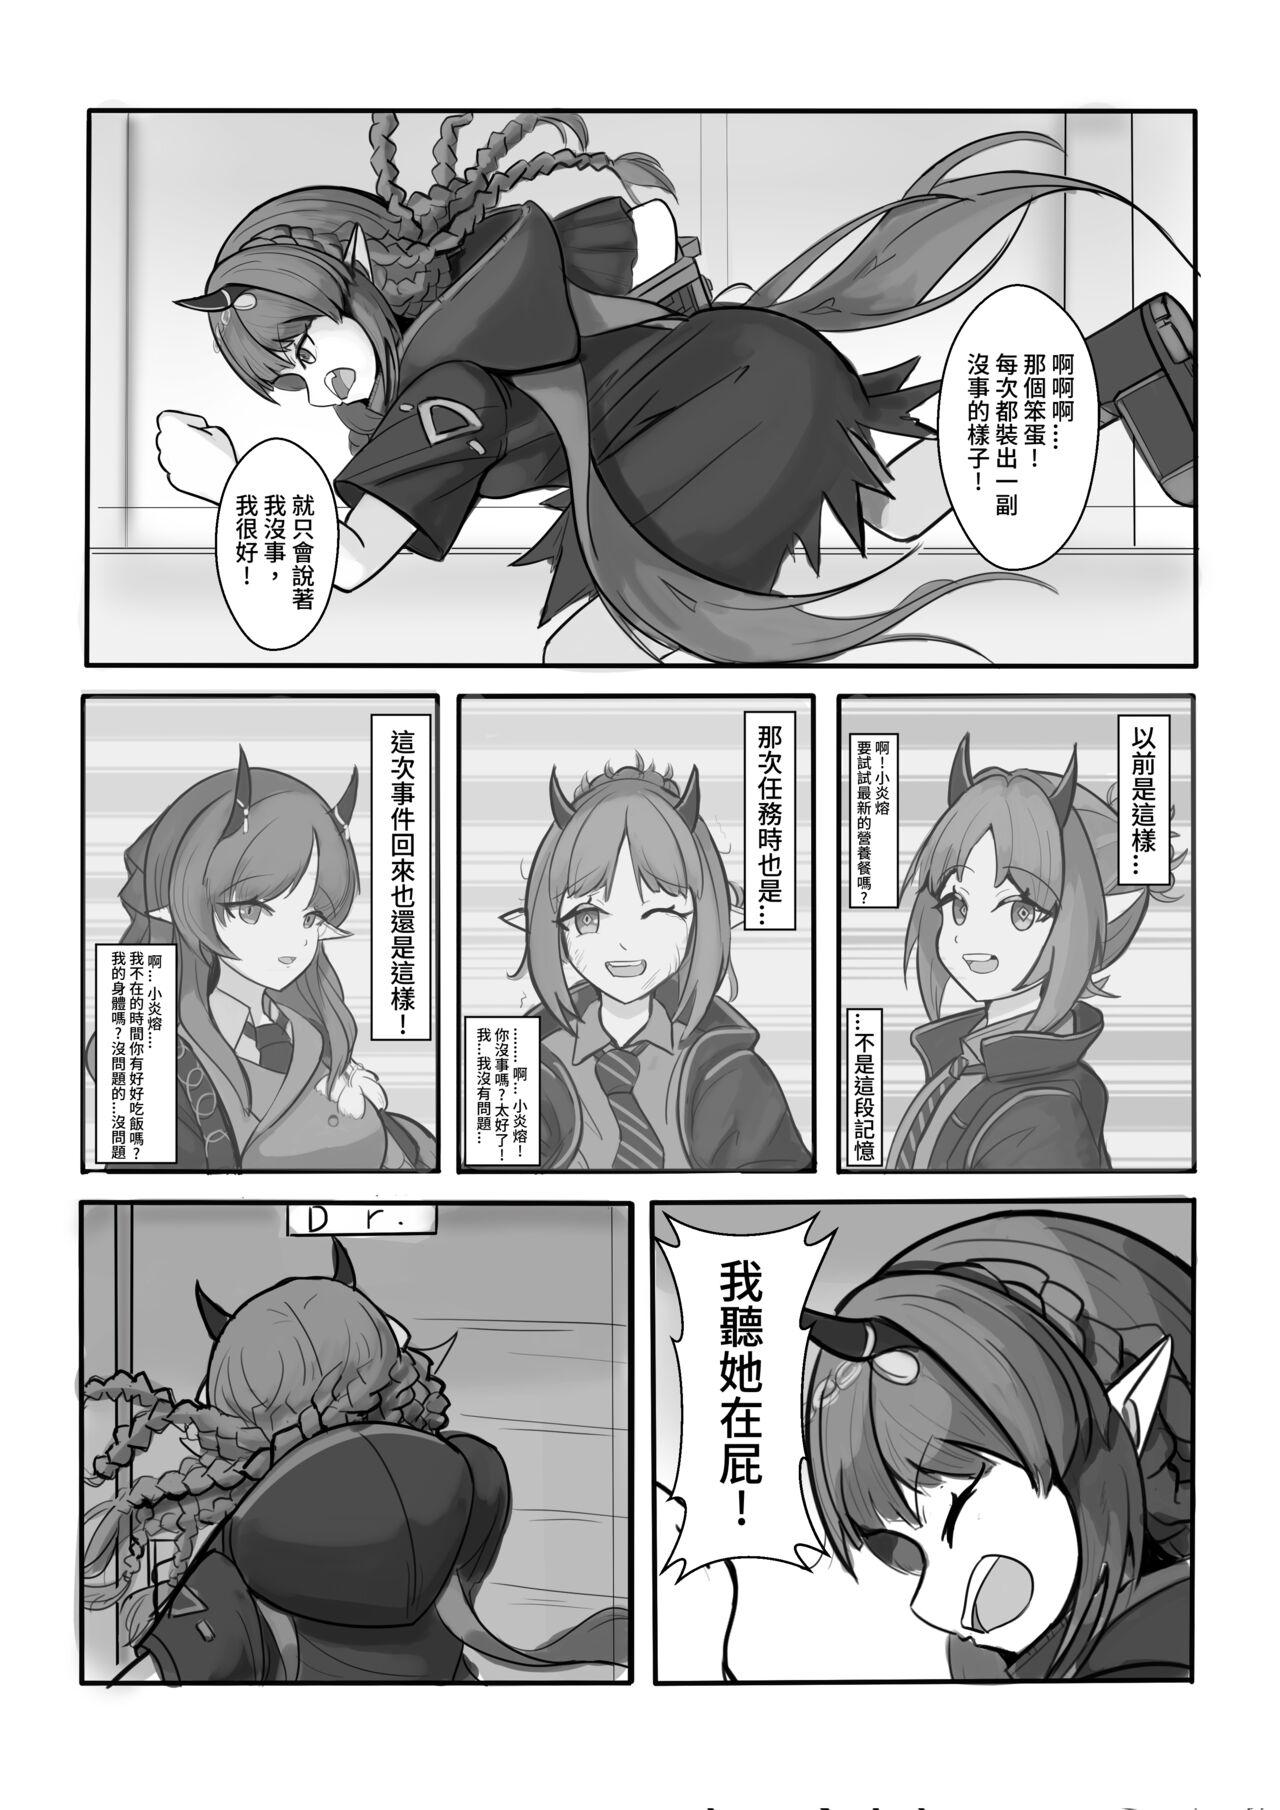 Mamada AfterGlow - Arknights Orgame - Page 4